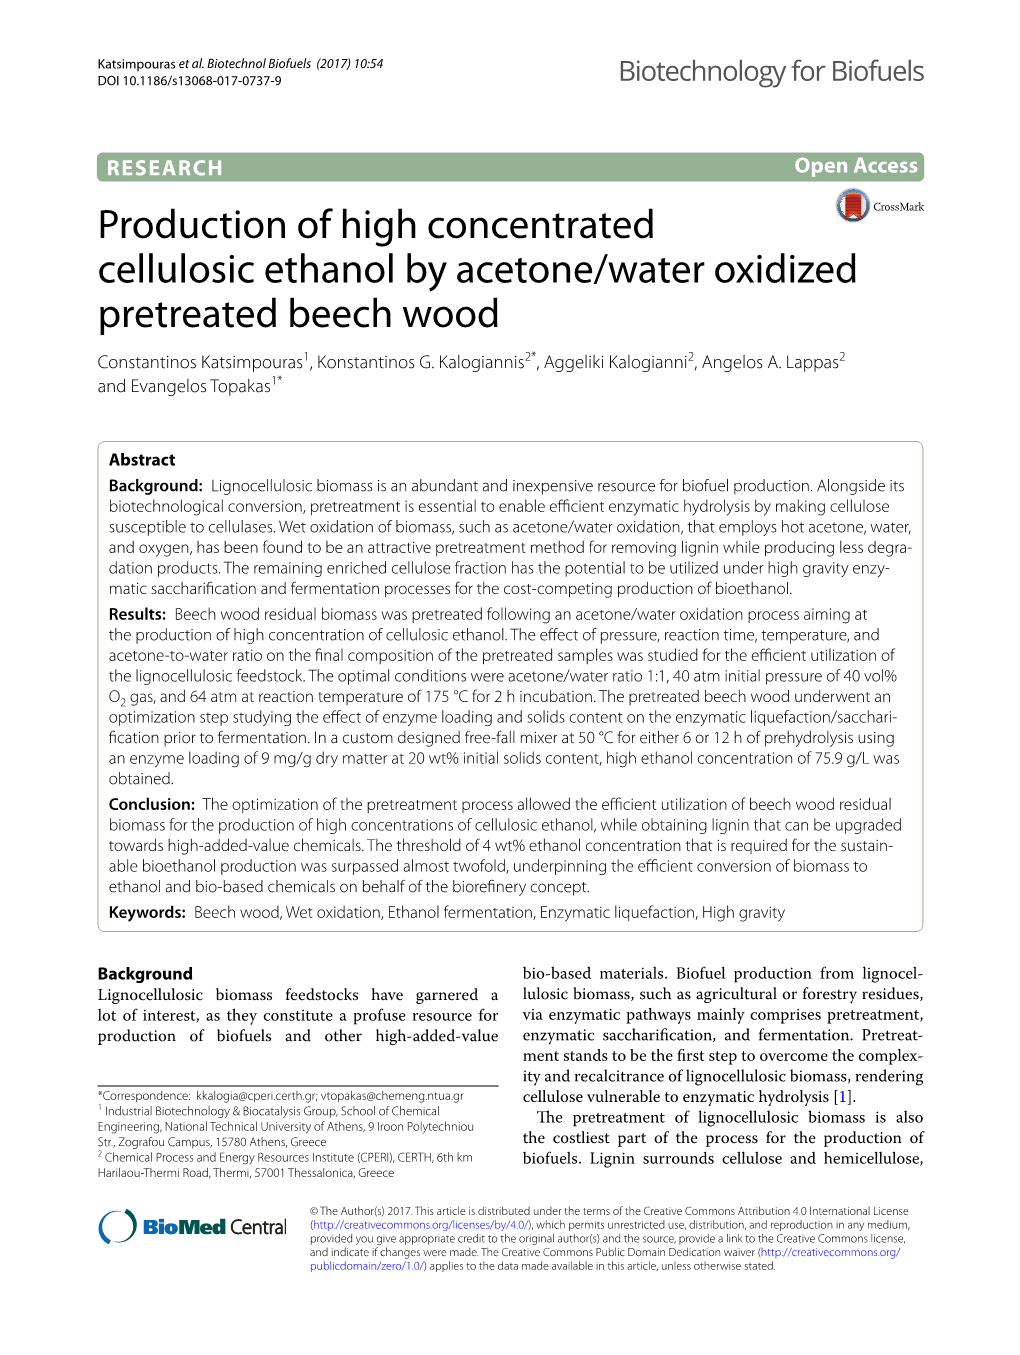 Production of High Concentrated Cellulosic Ethanol by Acetone/Water Oxidized Pretreated Beech Wood Constantinos Katsimpouras1, Konstantinos G